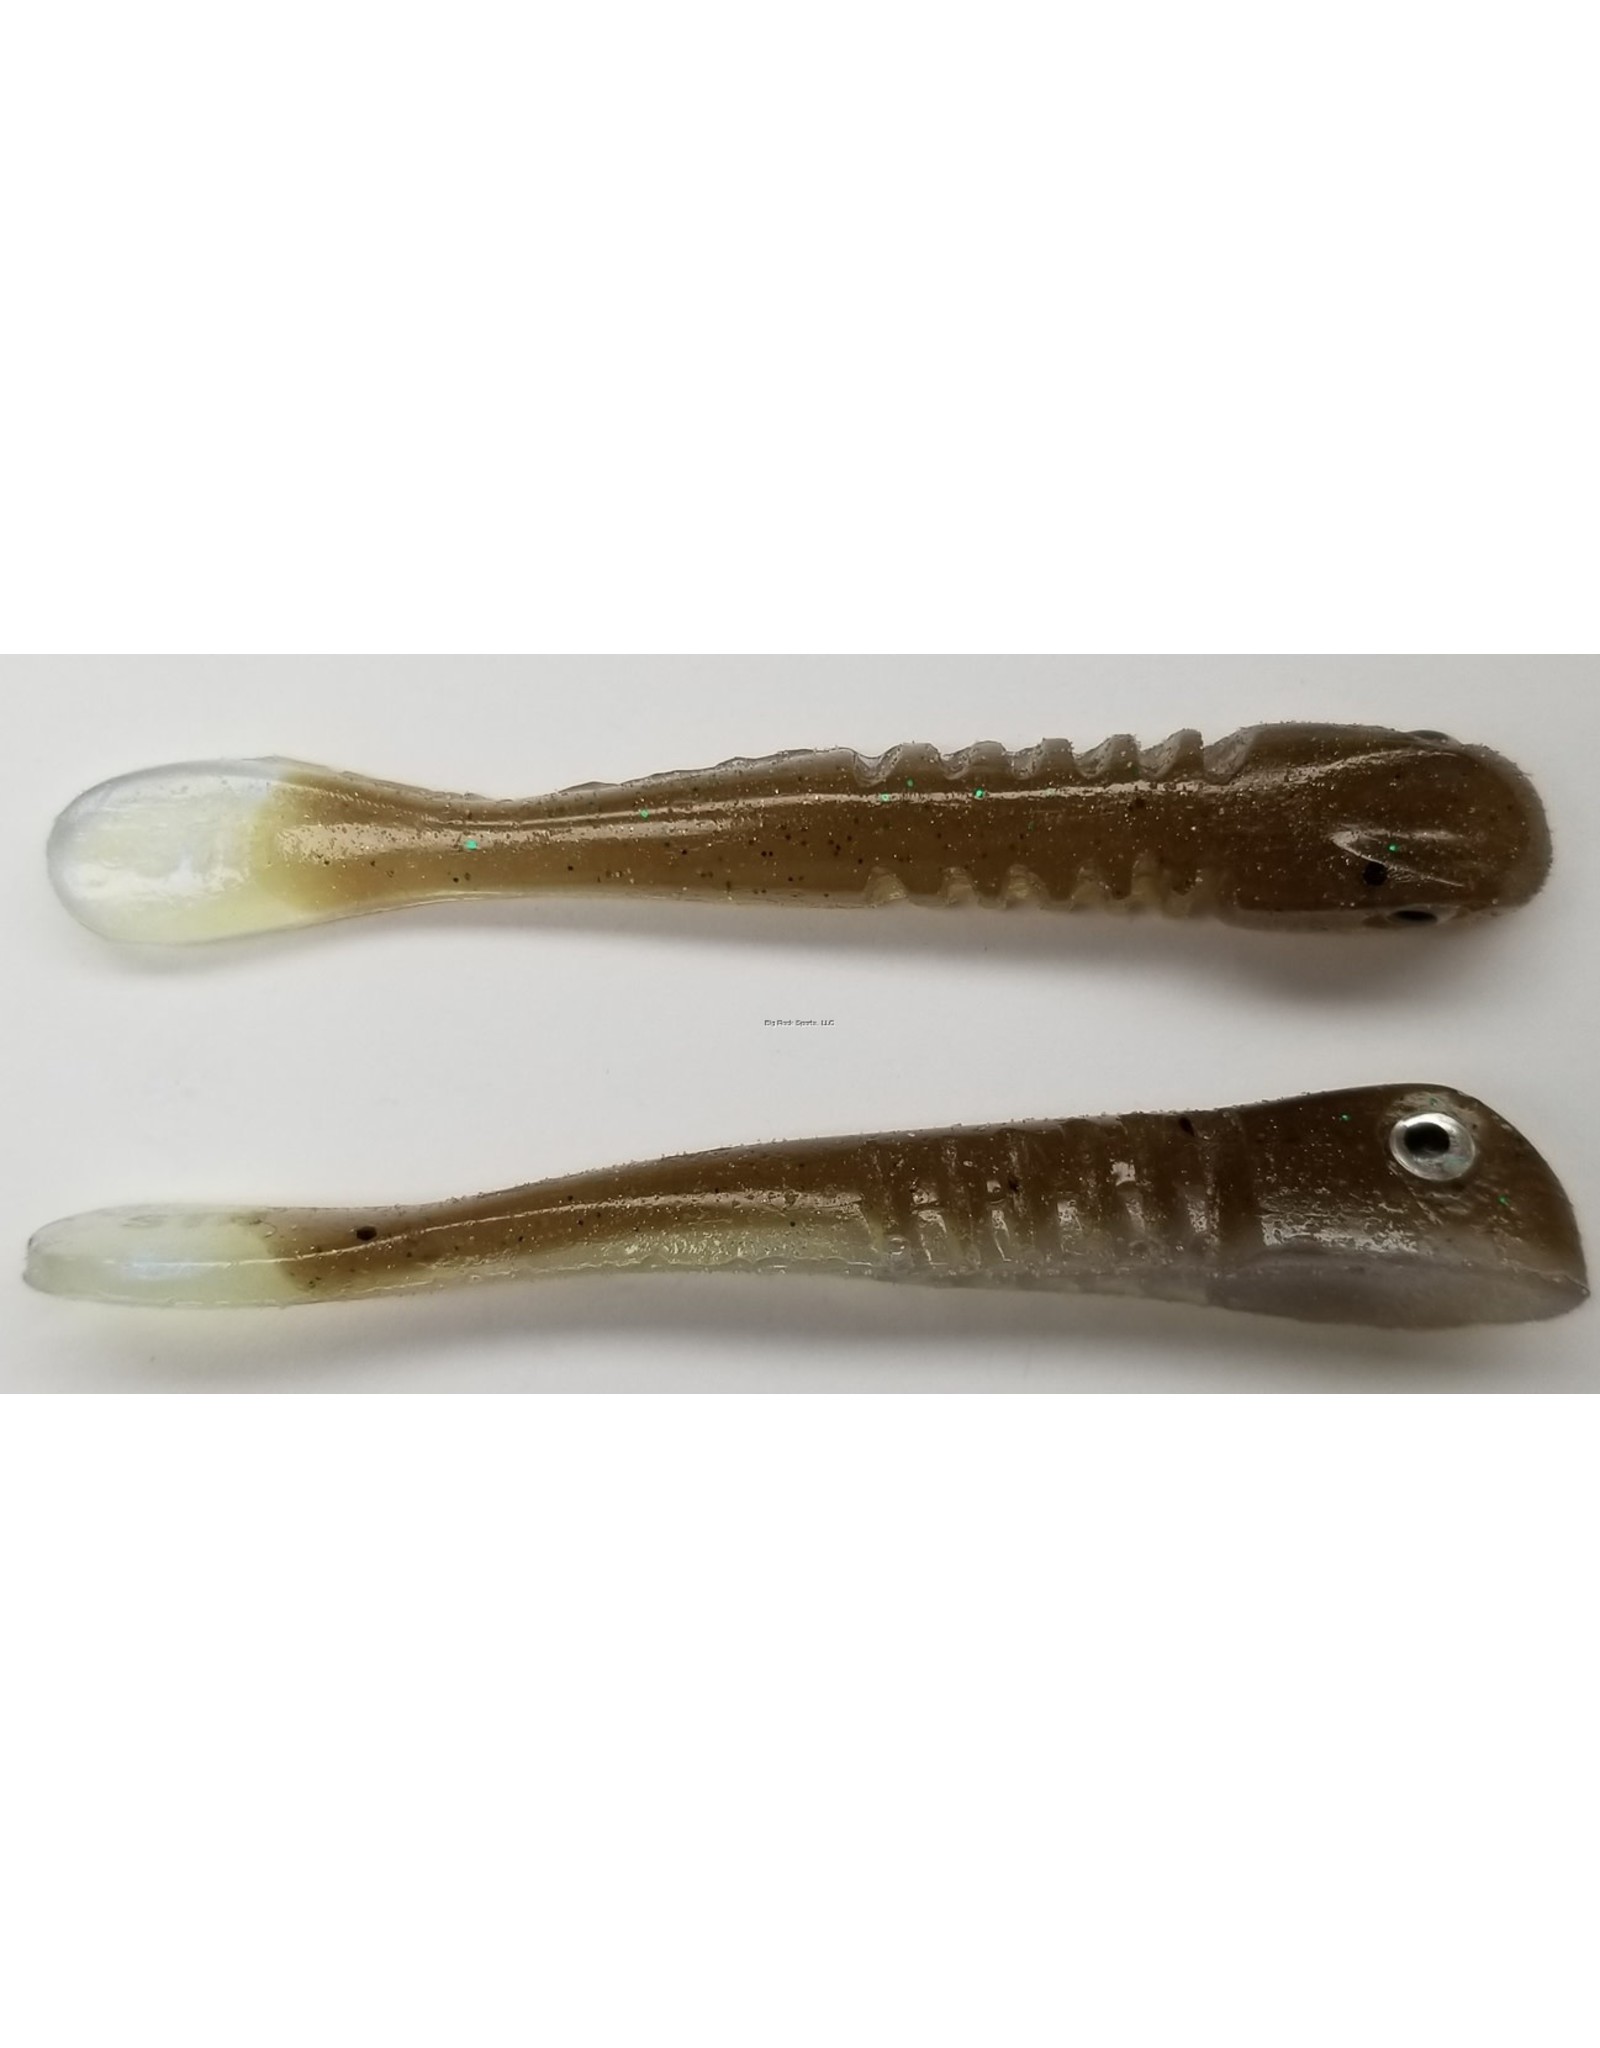 Set The Hook Set The Hook STH-DRI-126 Floating Soft Plastic With Eyes Drifter Lake Ontario Goby 6 Per Pack